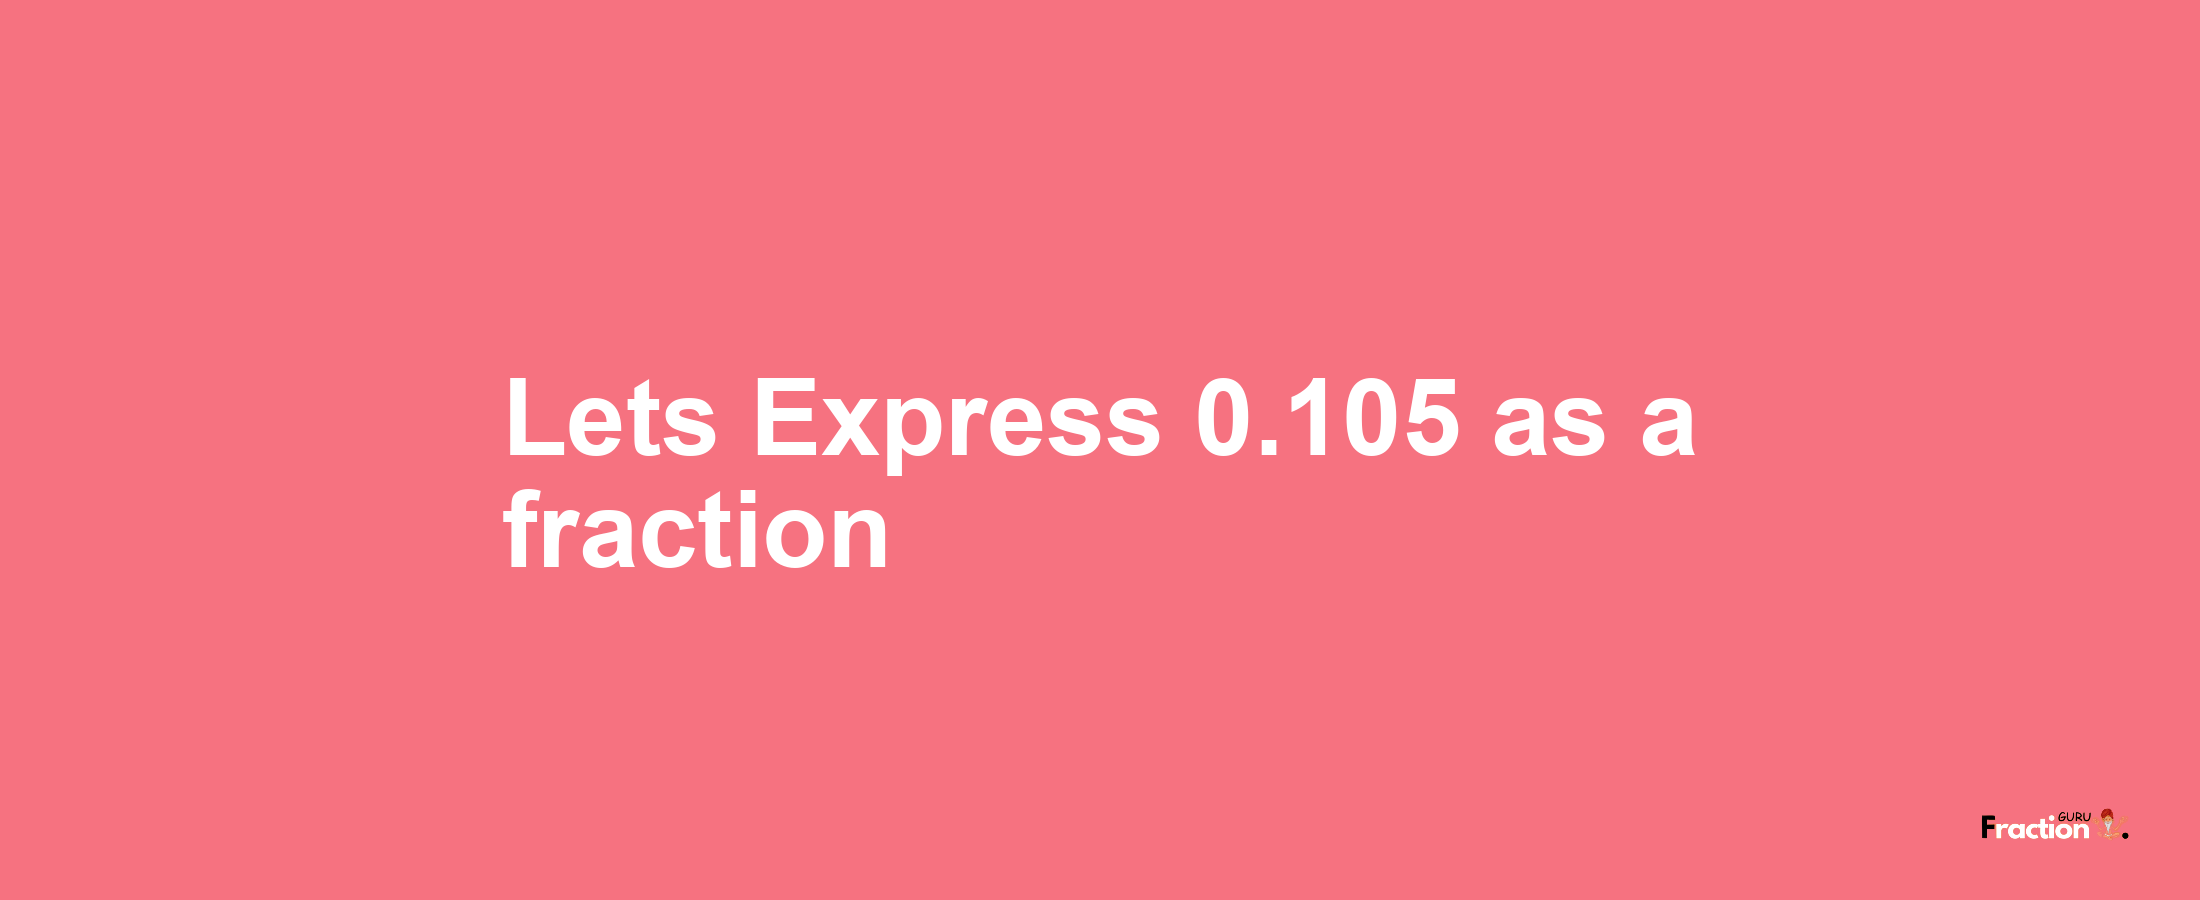 Lets Express 0.105 as afraction